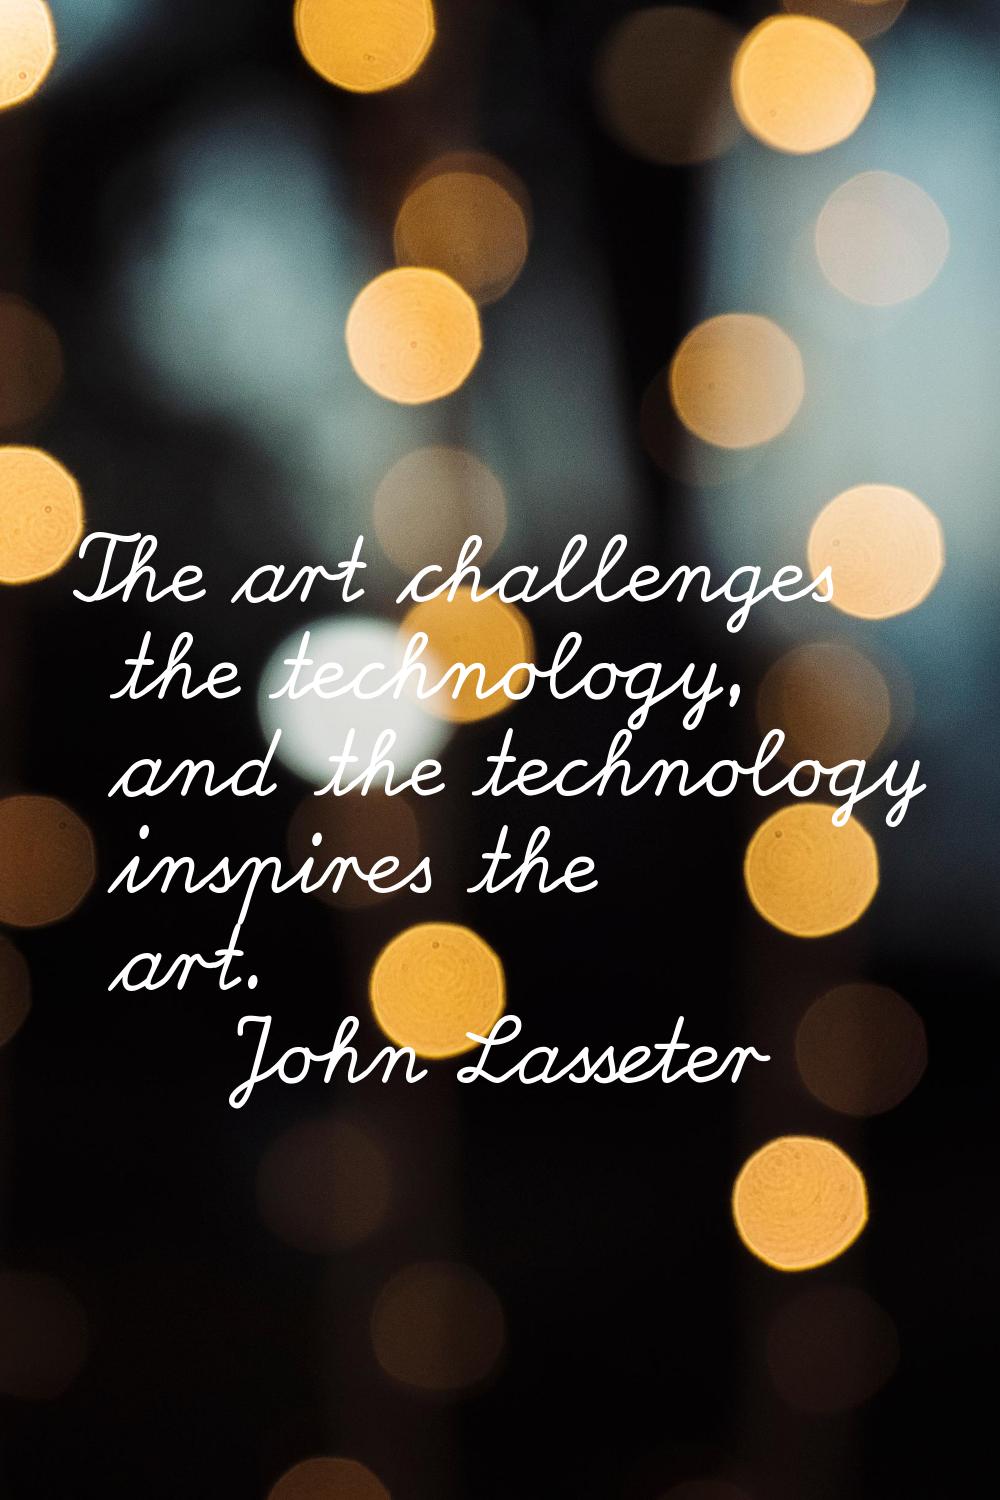 The art challenges the technology, and the technology inspires the art.